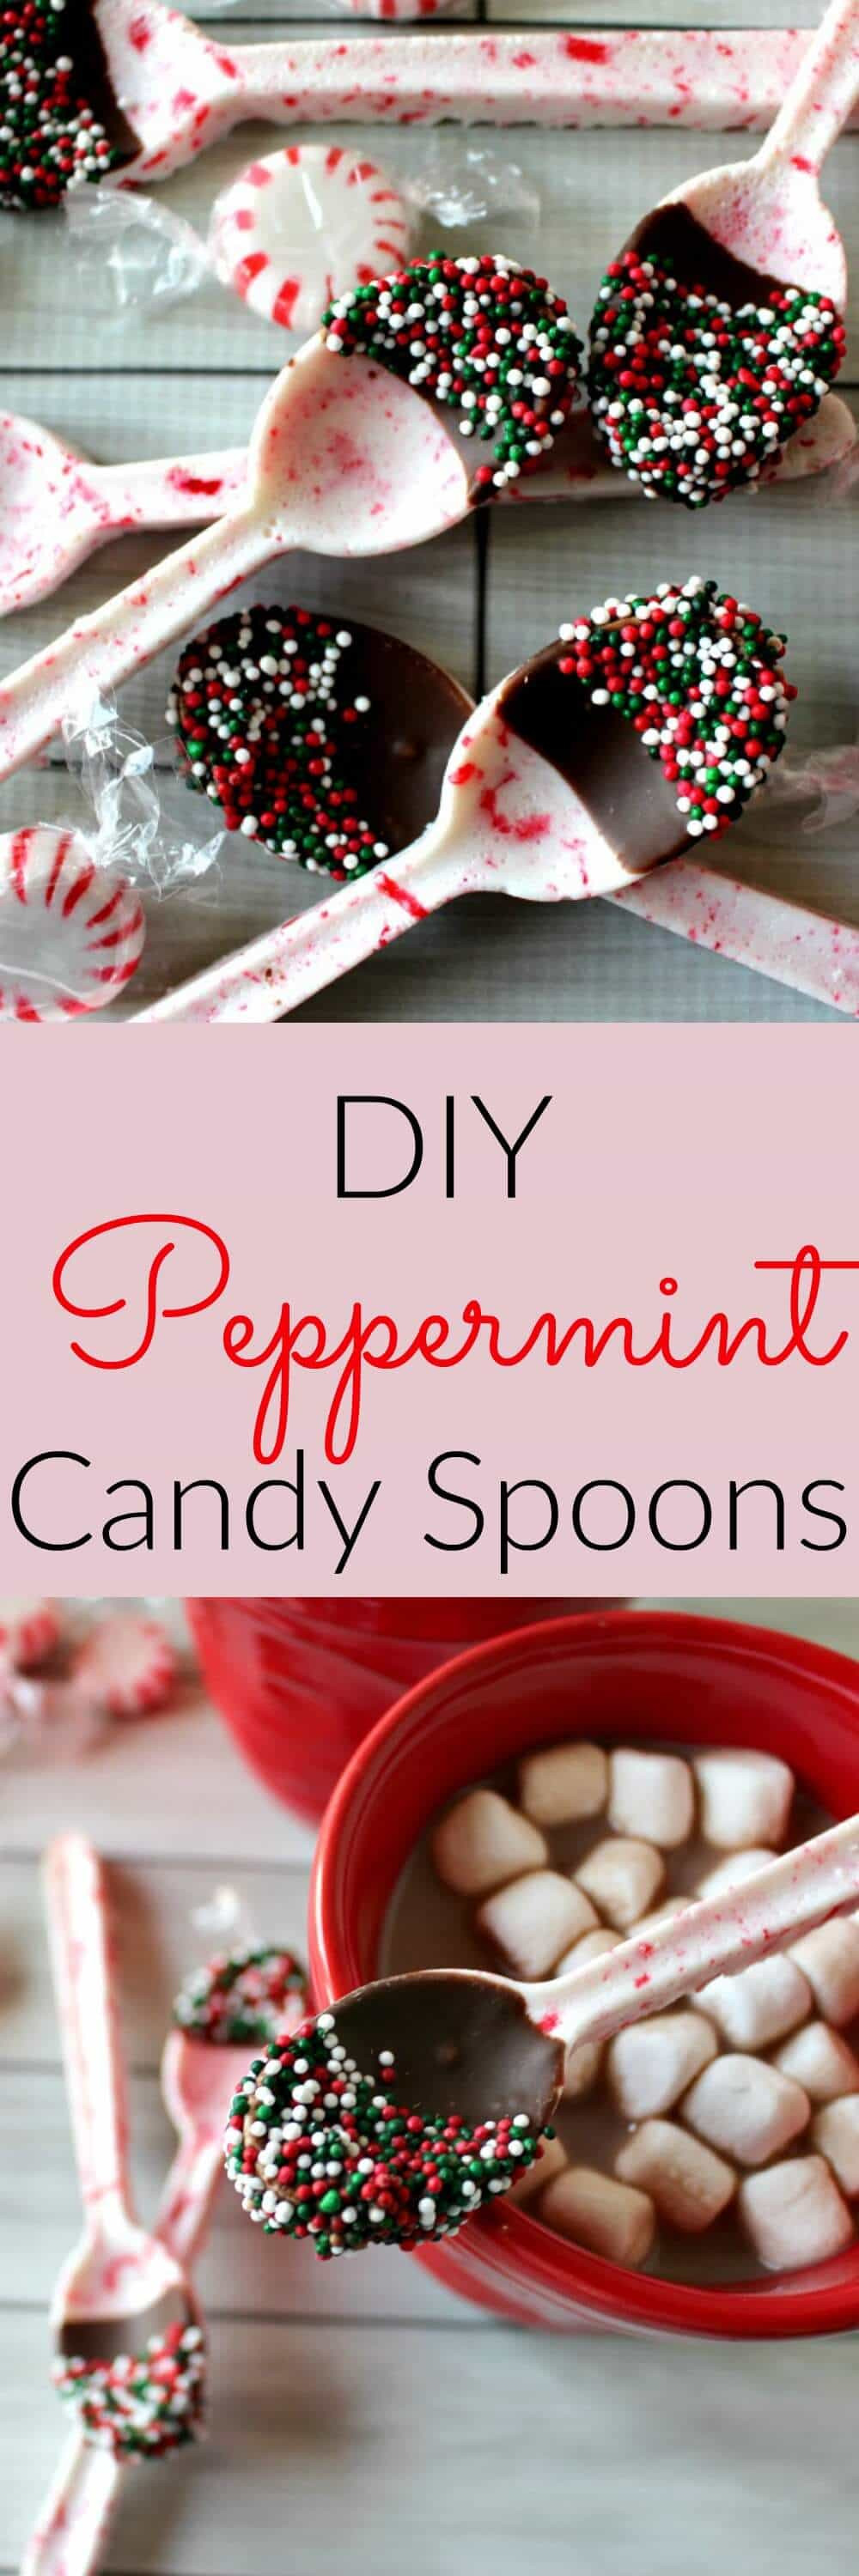 Homemade Christmas Candy Gift Ideas
 DIY Peppermint Candy Spoons Princess Pinky Girl